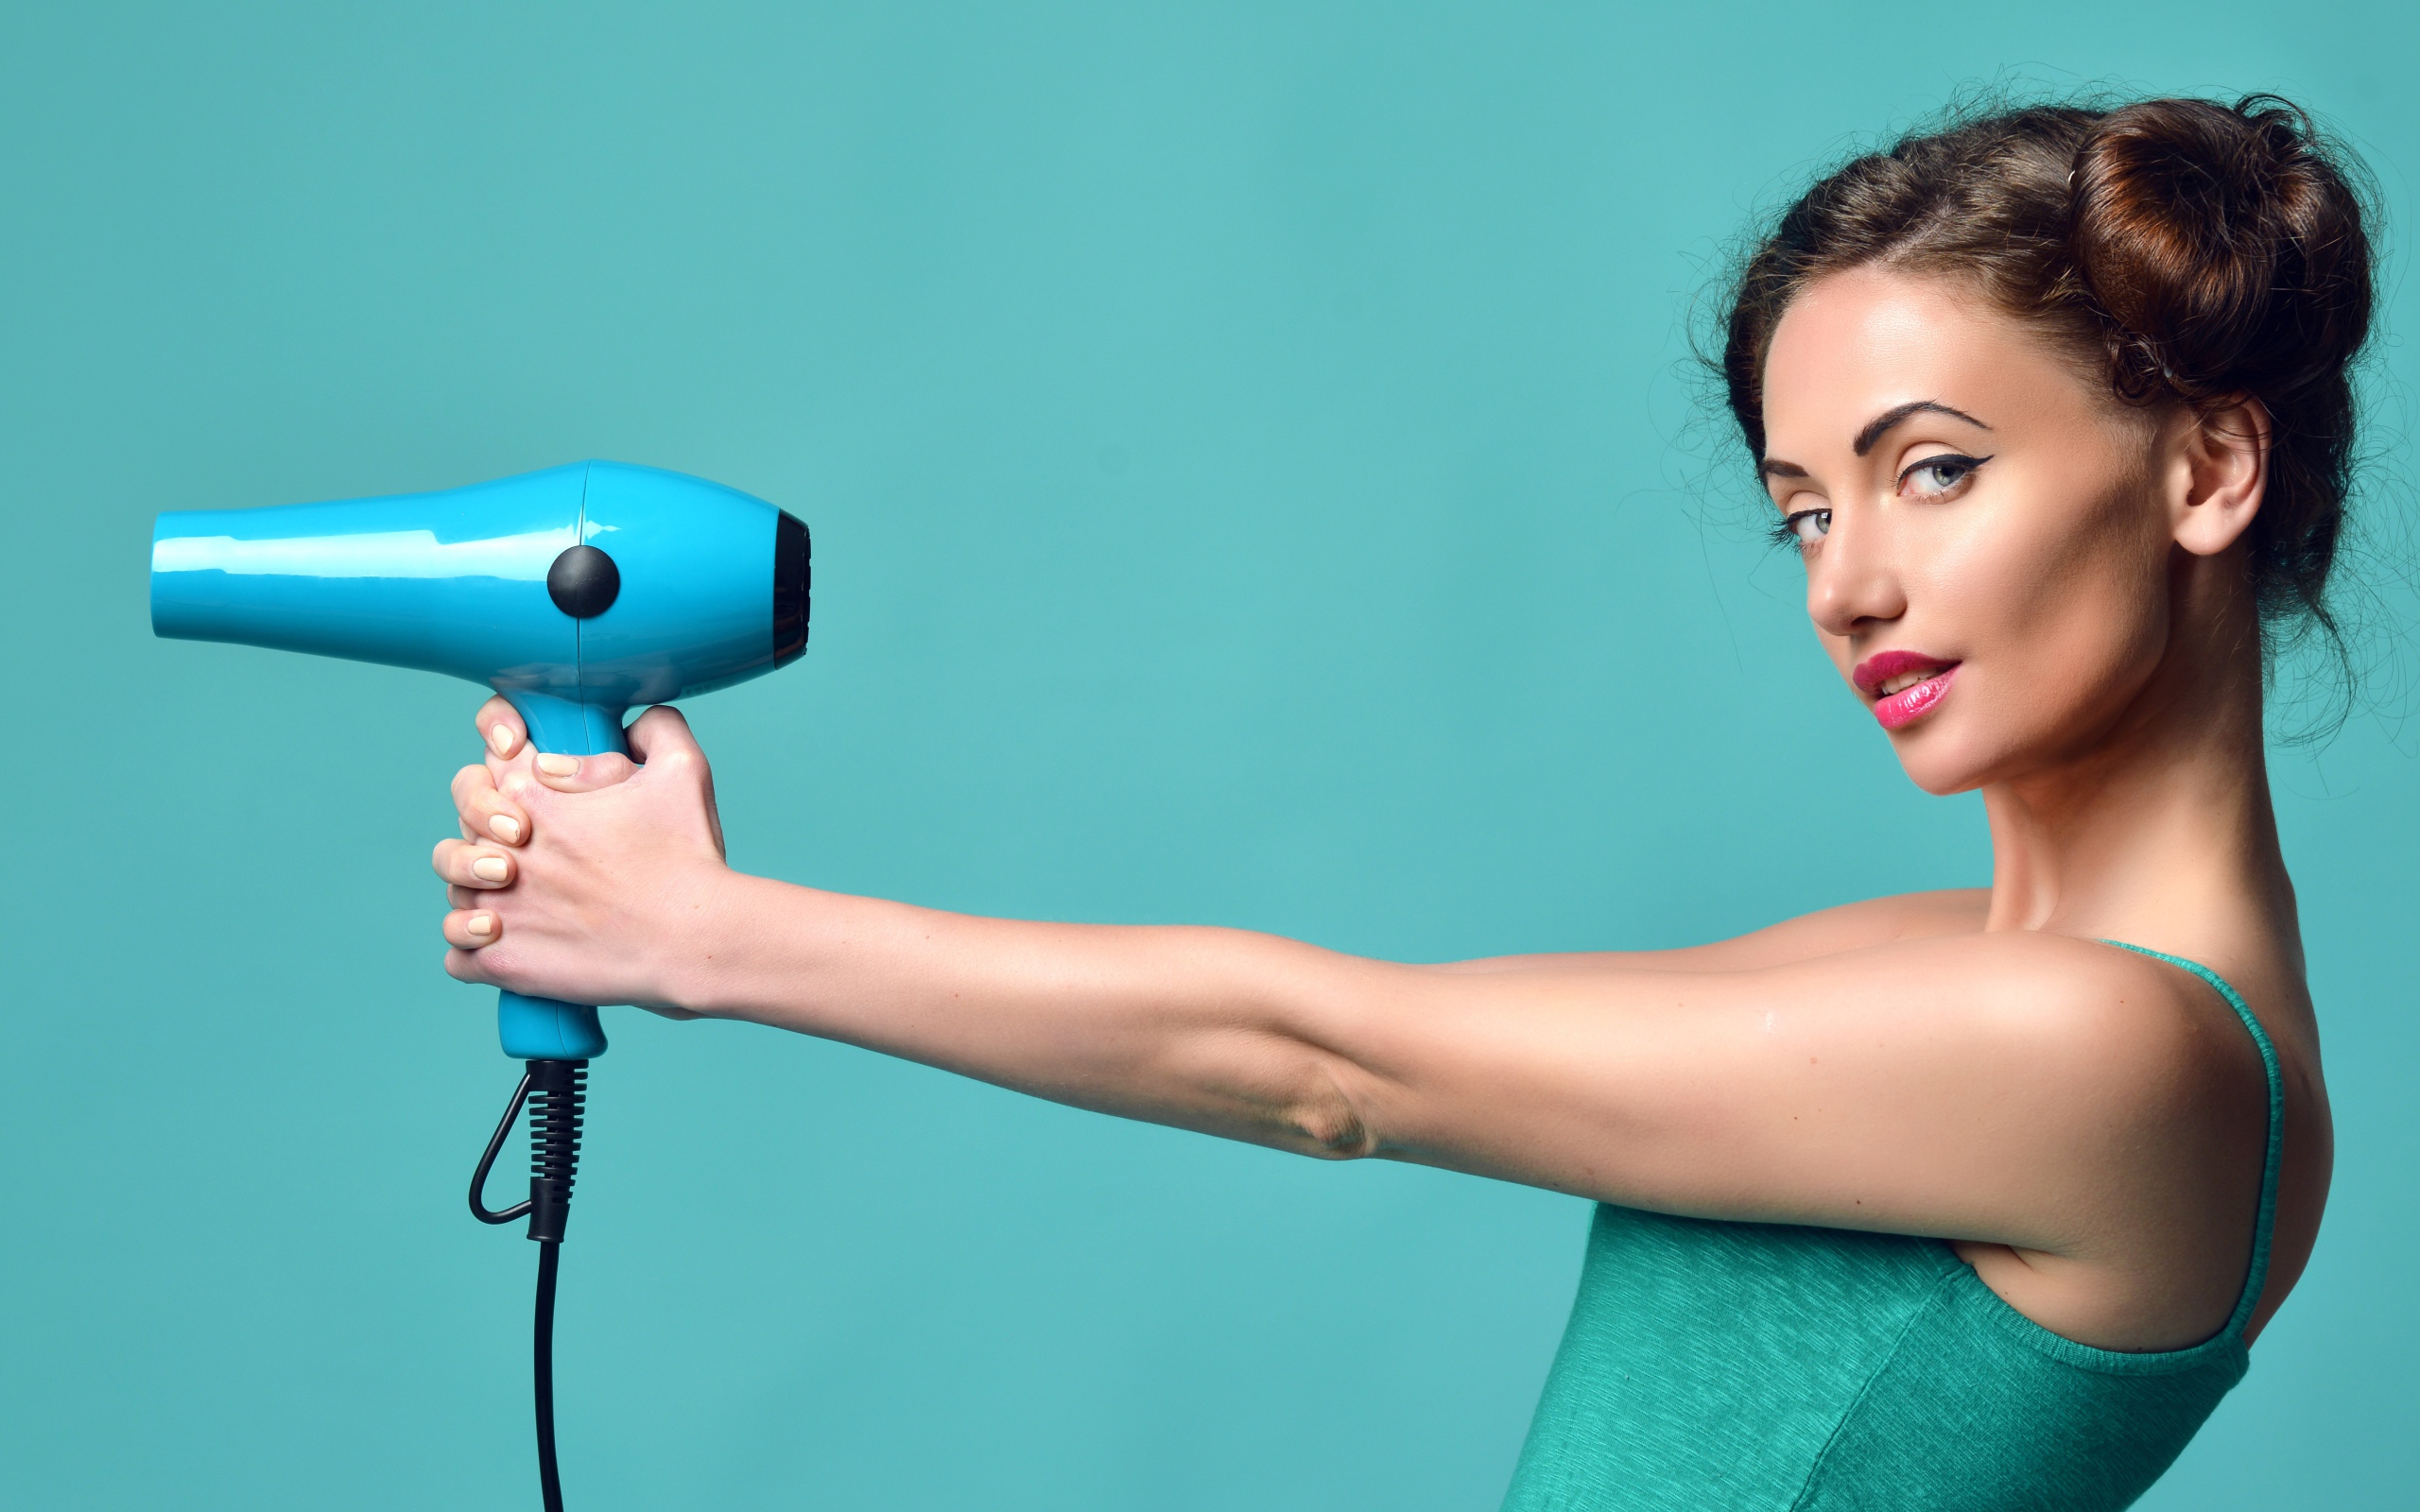 Beautiful girl with a hairdryer in hands on a blue background